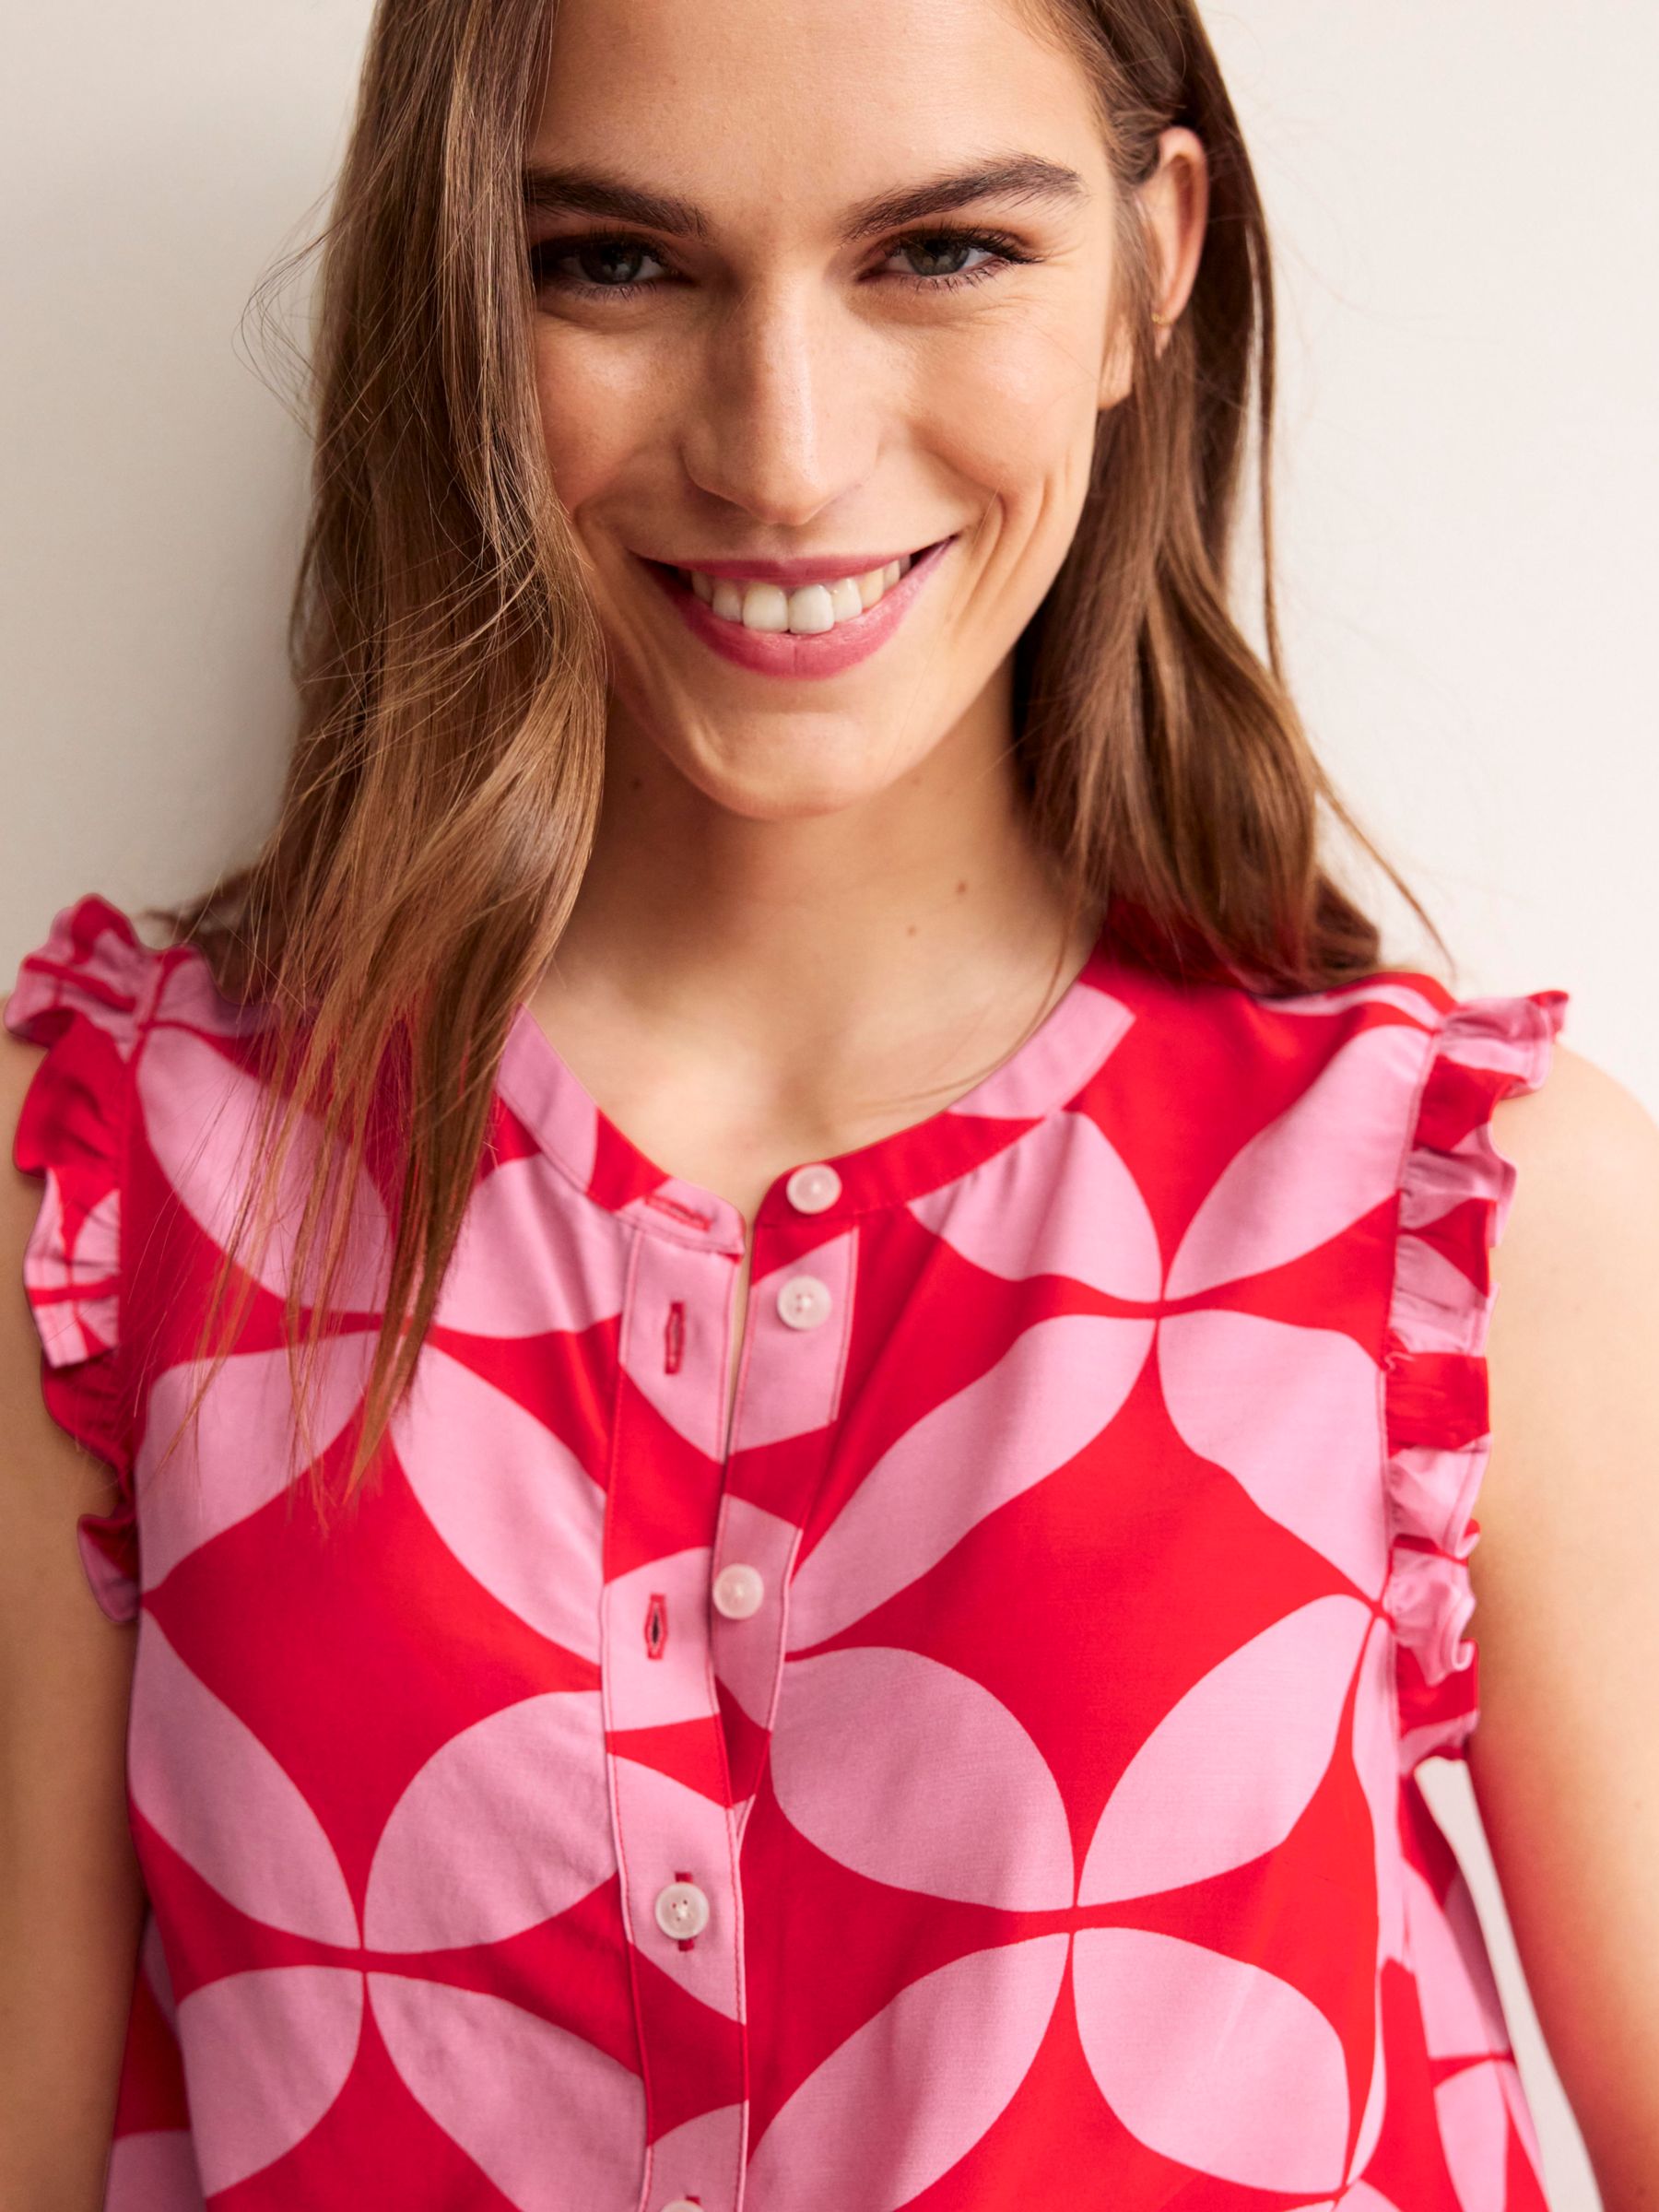 Buy Boden Alicia Button Down Top, Scarlet/Diamond Online at johnlewis.com